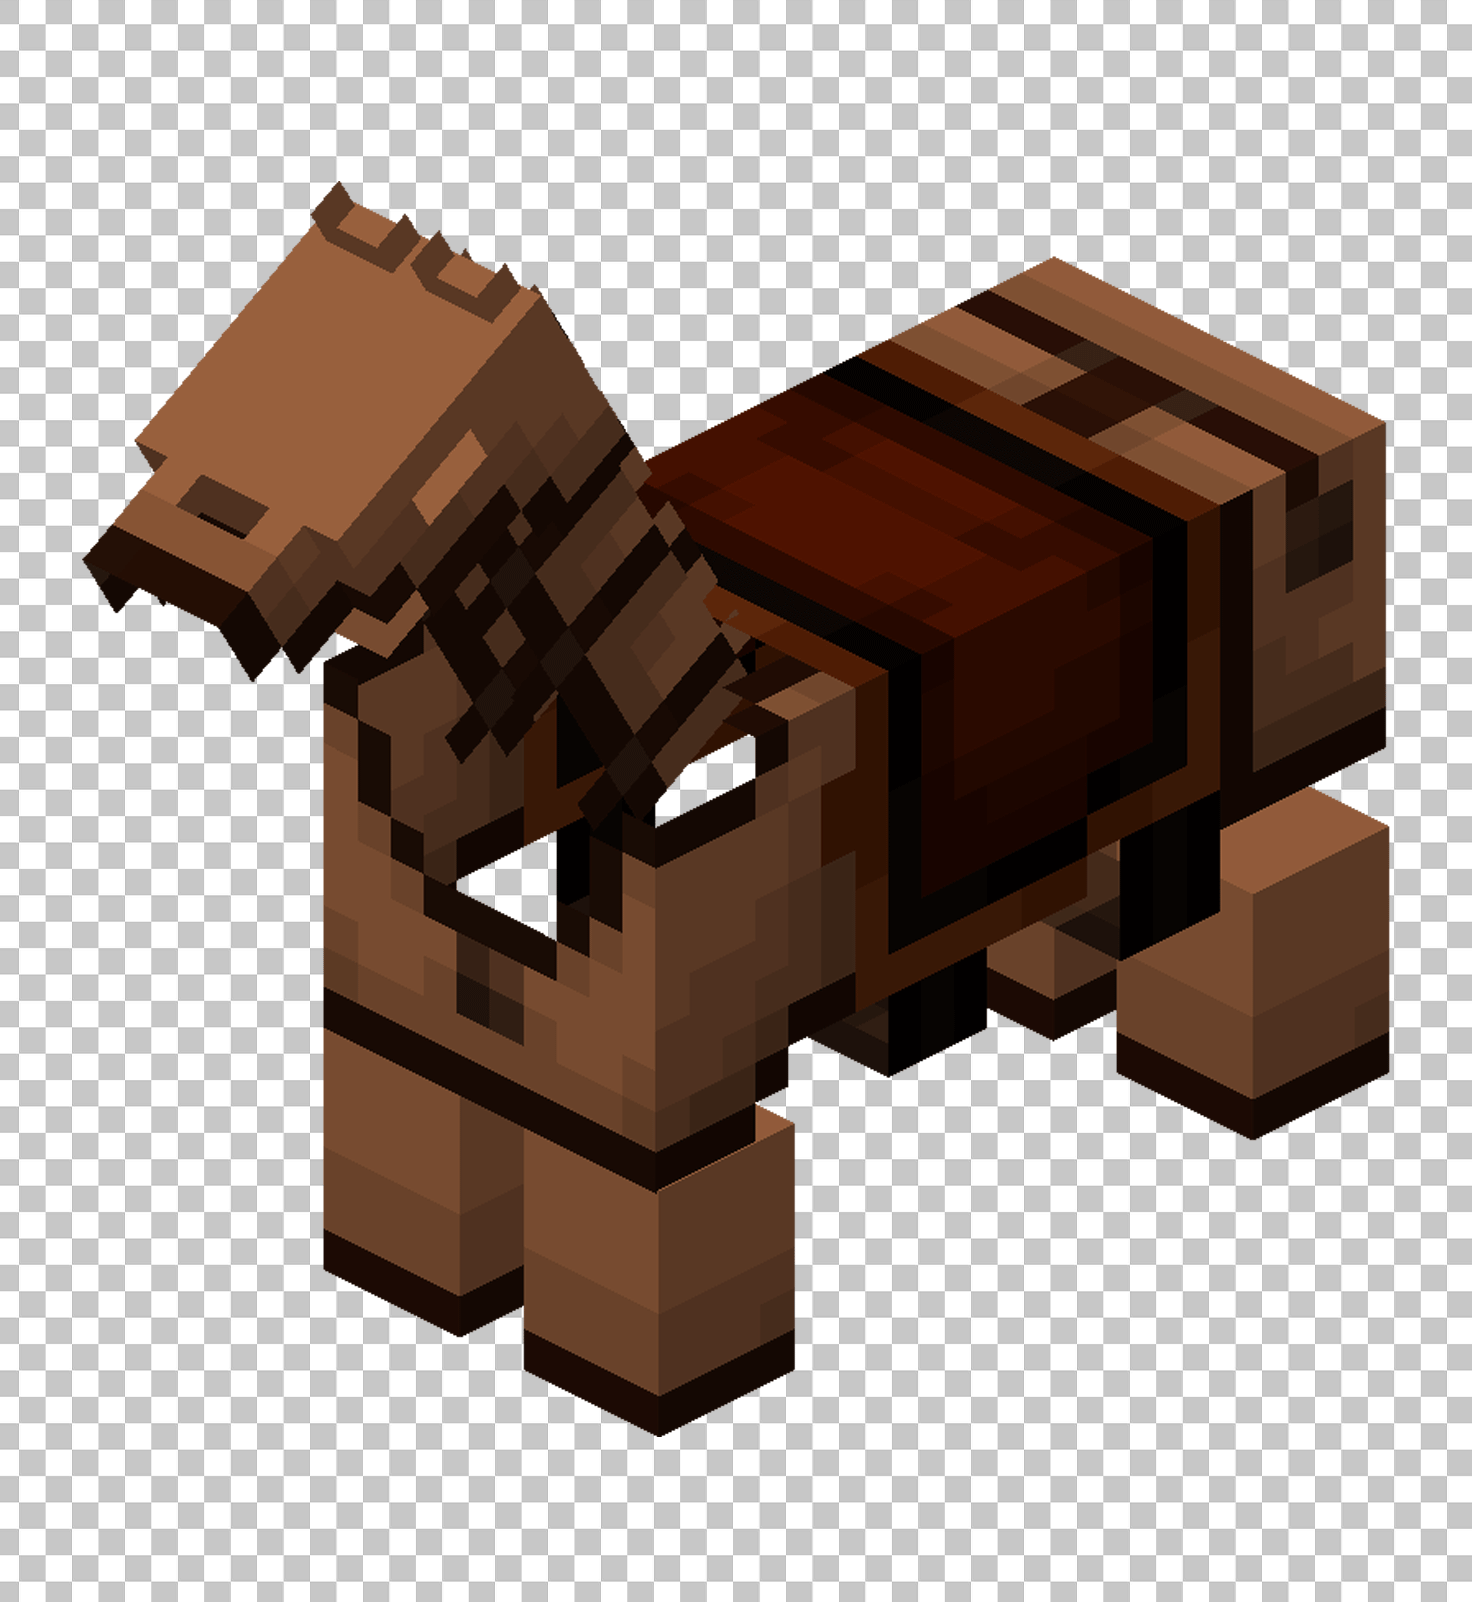 A brown Minecraft horse, adorned in full leather horse armor, standing on a transparent background.